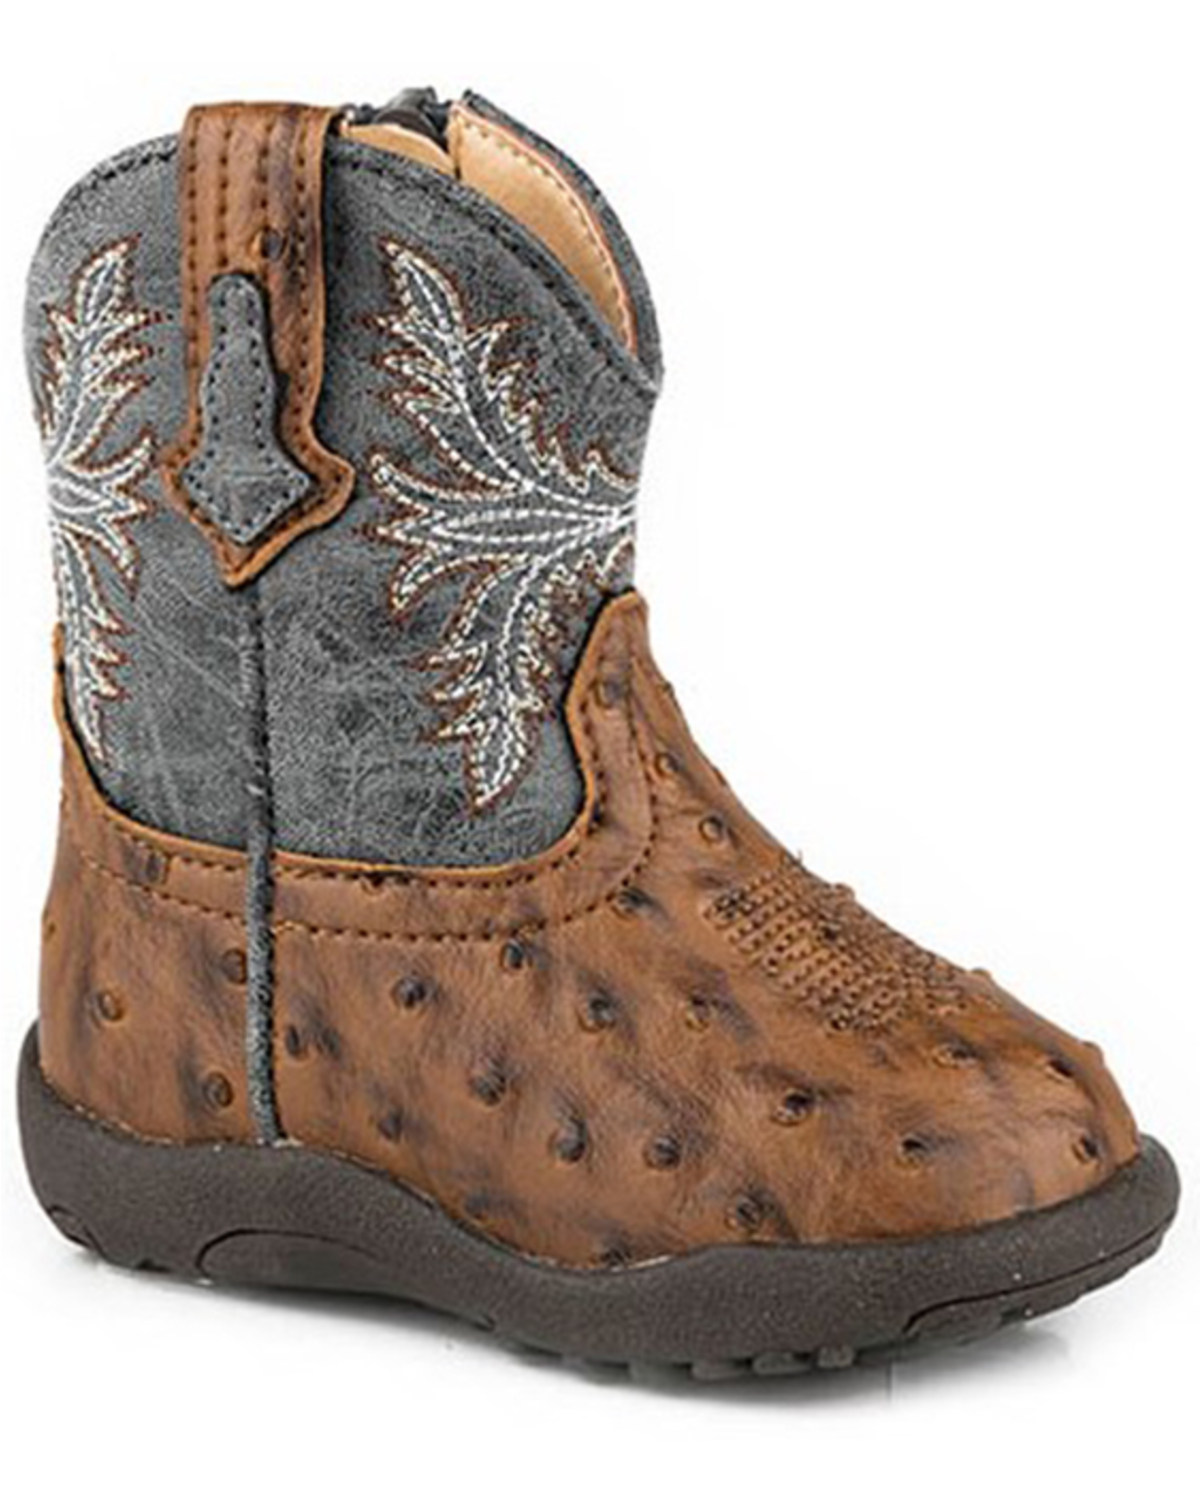 Roper Infant Boys' Henry Western Boots - Round Toe